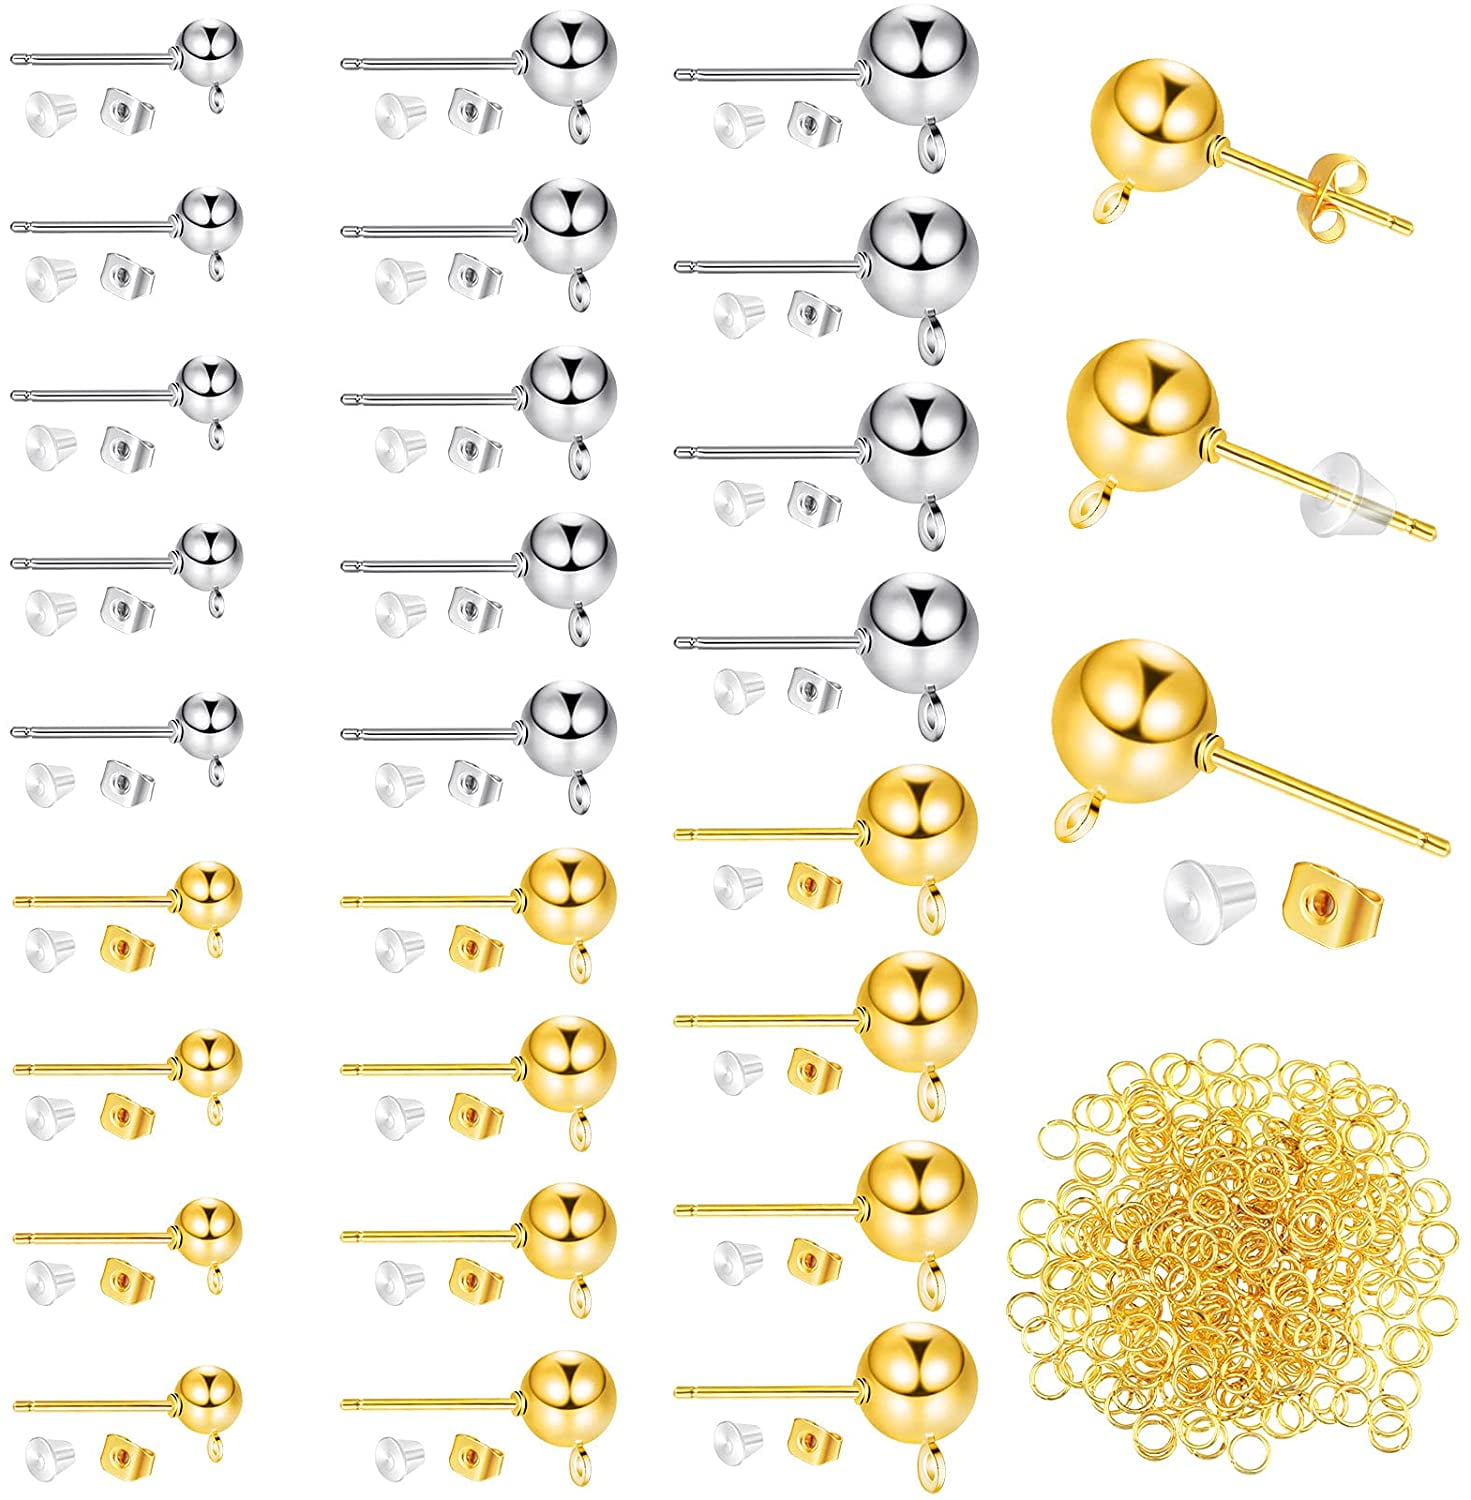 780 Pieces 3 Sizes Ball Post Earring Studs with Loop 4 mm 5 mm 6 mm Round Ball Earring Posts, Butterfly Earring Backs, Silicone Clear Earring Backs